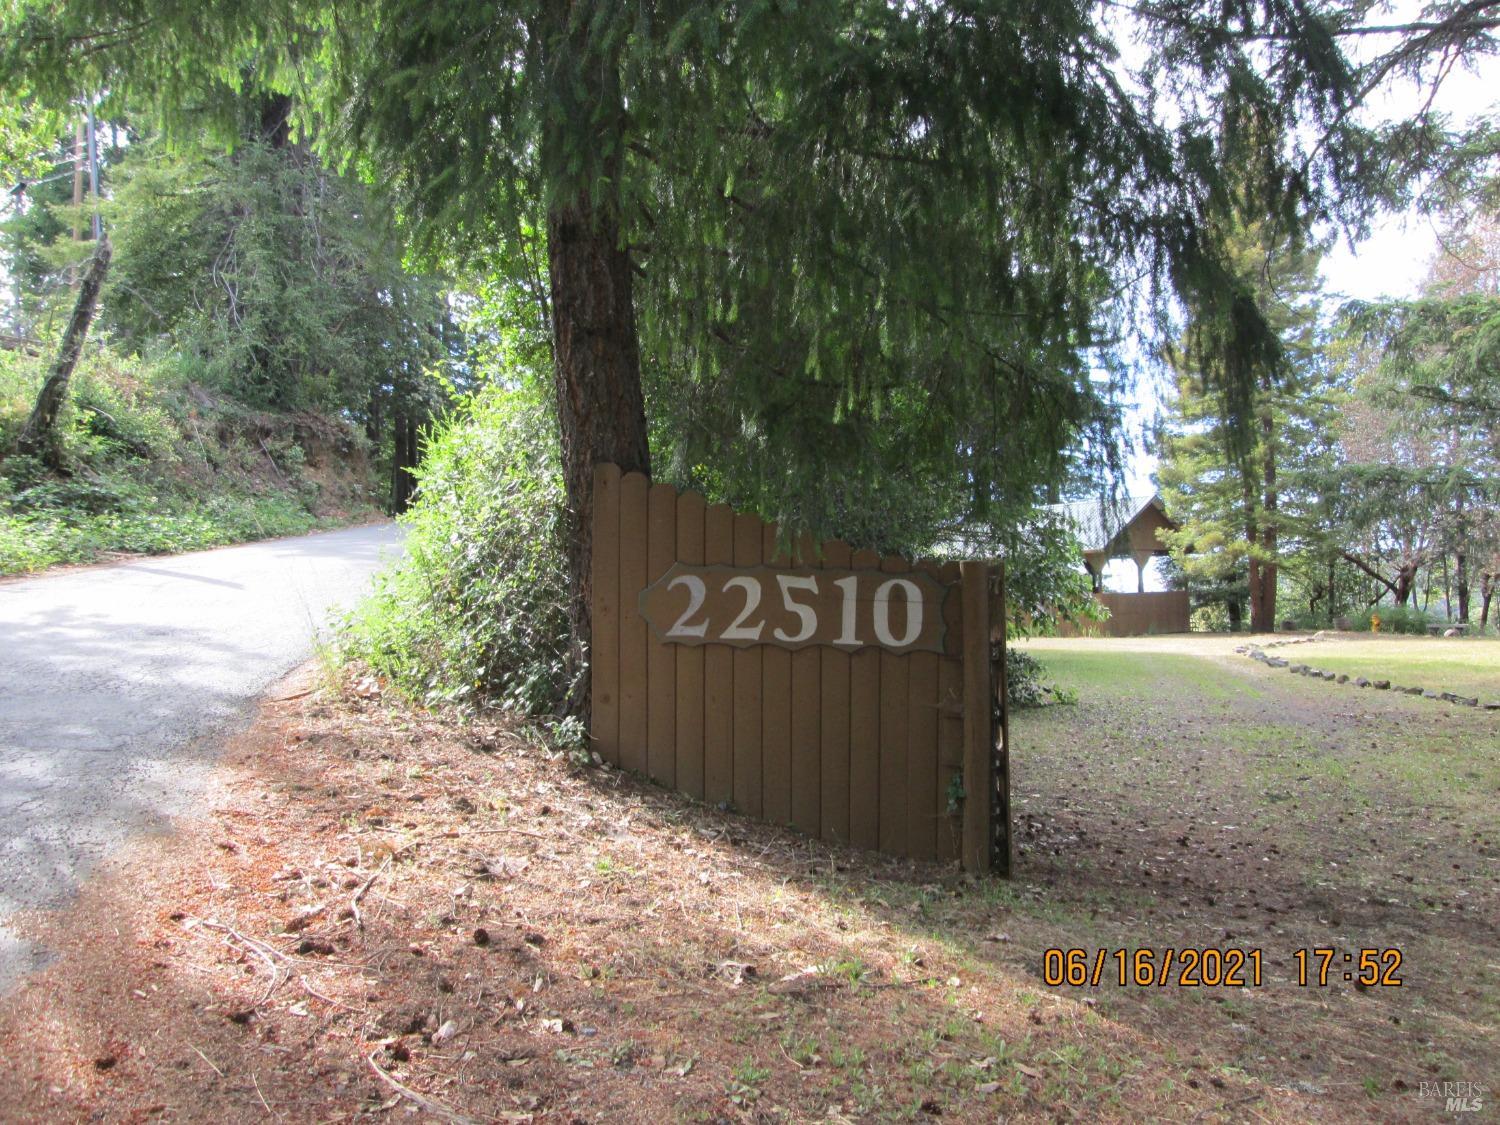 Photo of 22510 Fort Ross Rd in Cazadero, CA